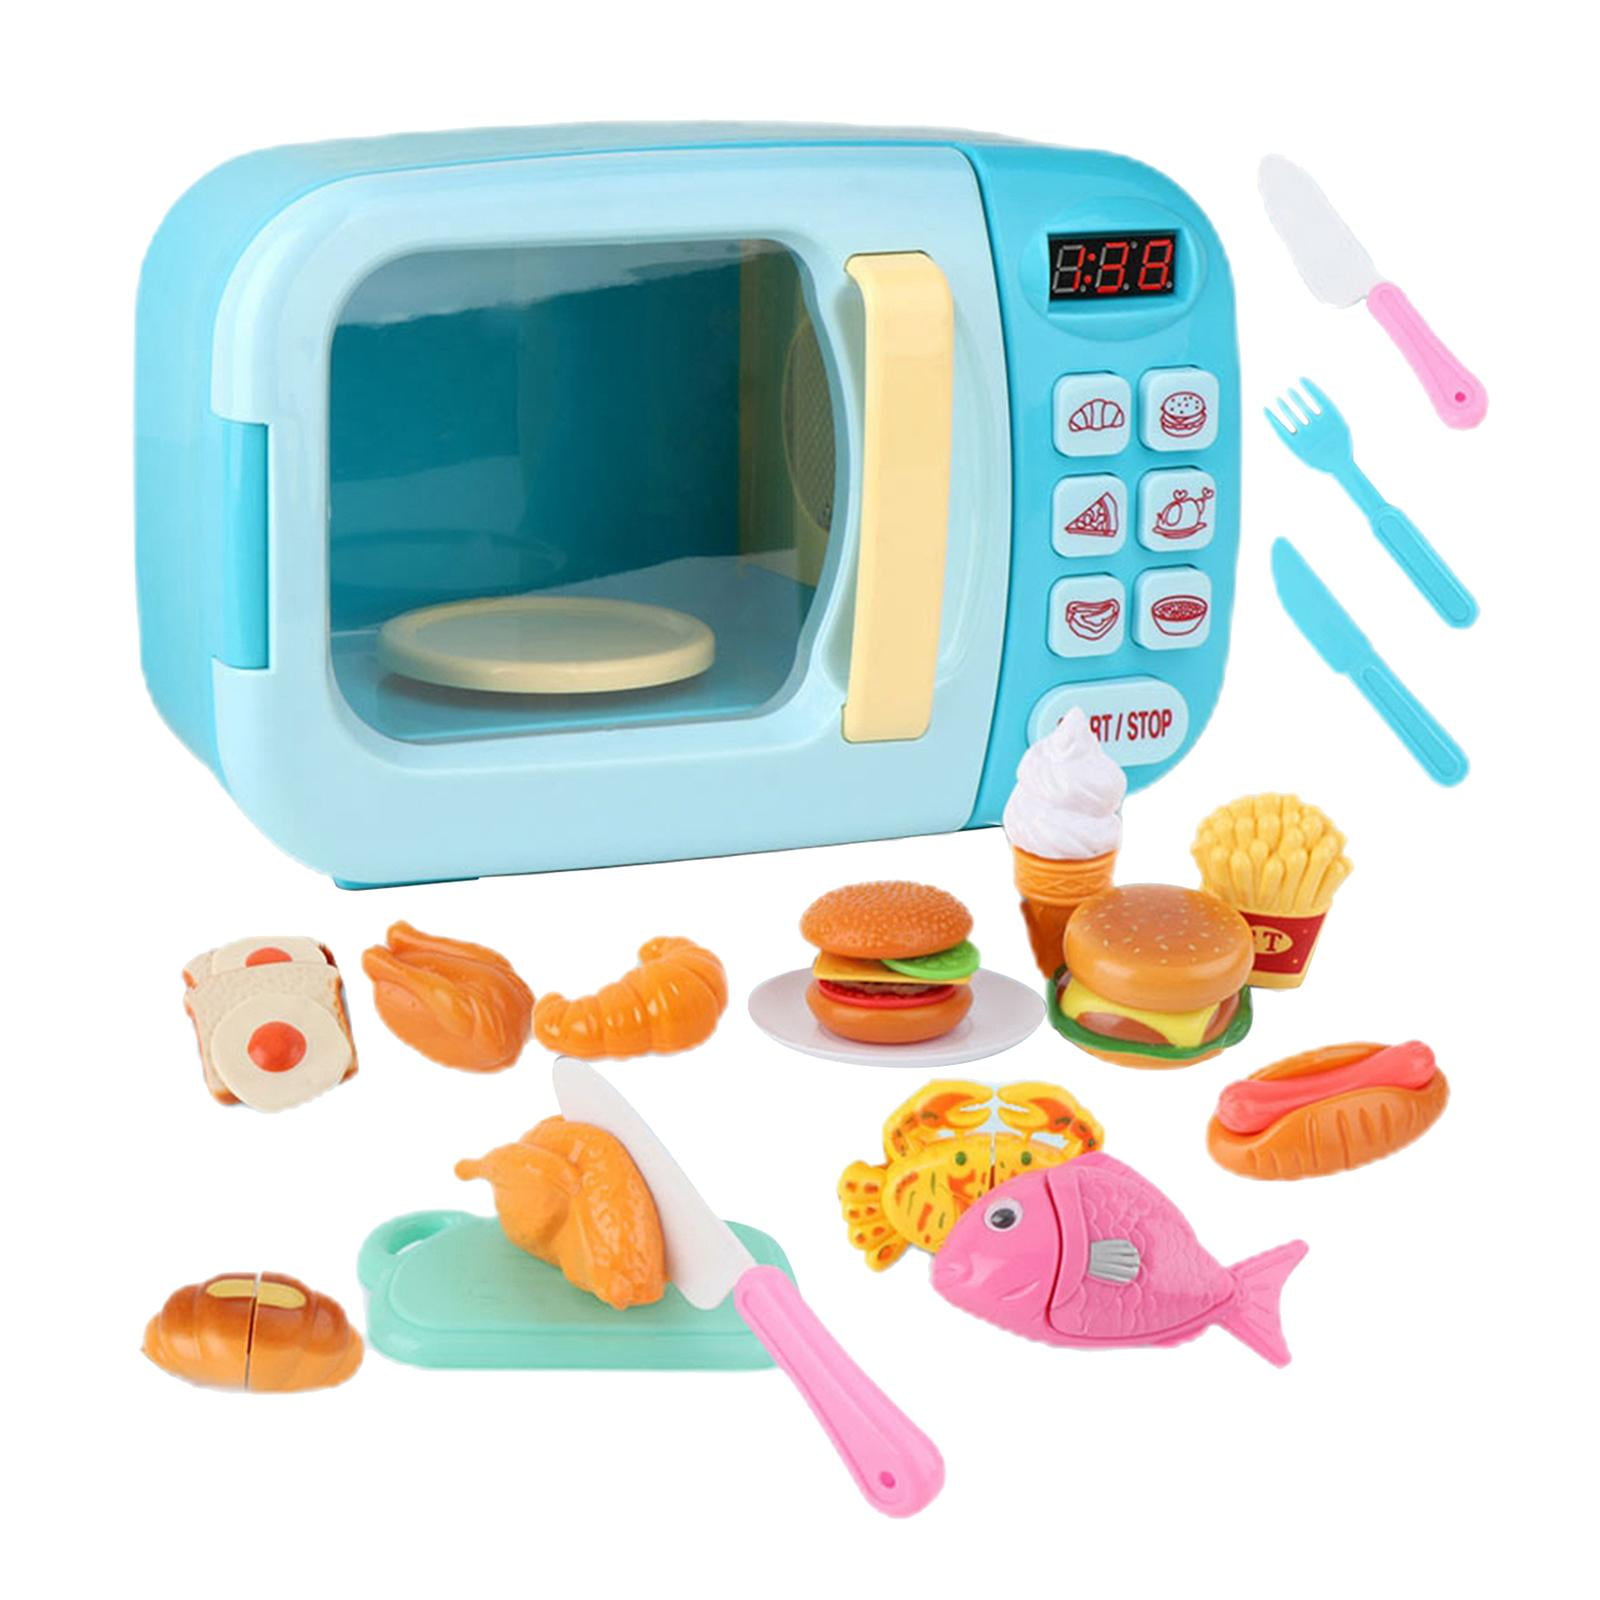 Microwave Toys Kitchen Play Set Kids Pretend Play Electronic Oven Cookware Gift 